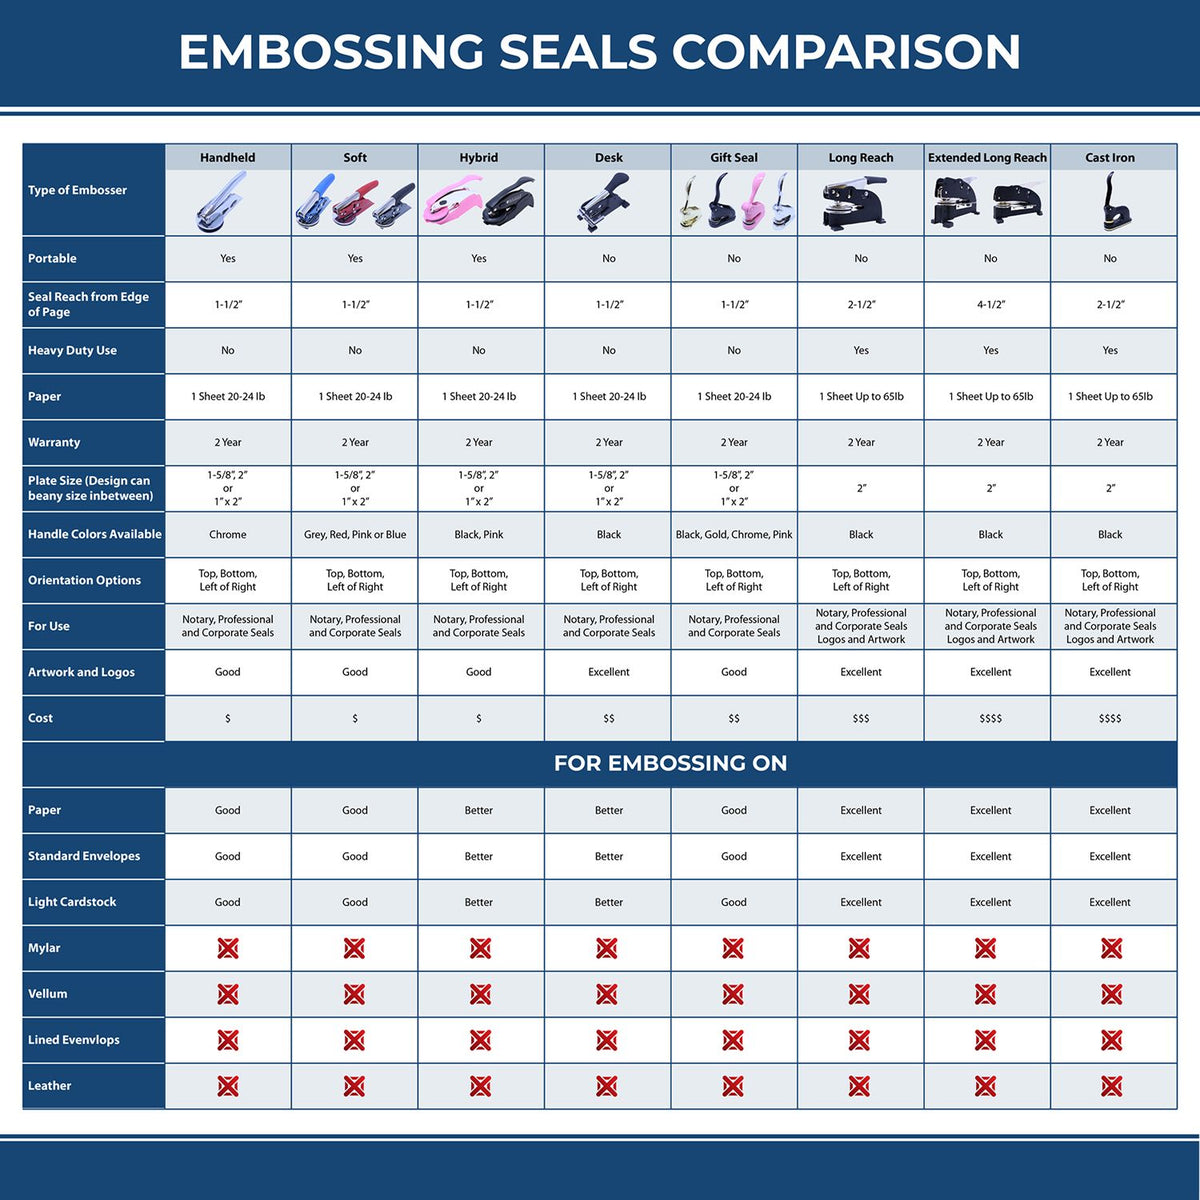 A comparison chart for the different types of mount models available for the District of Columbia Desk Surveyor Seal Embosser.